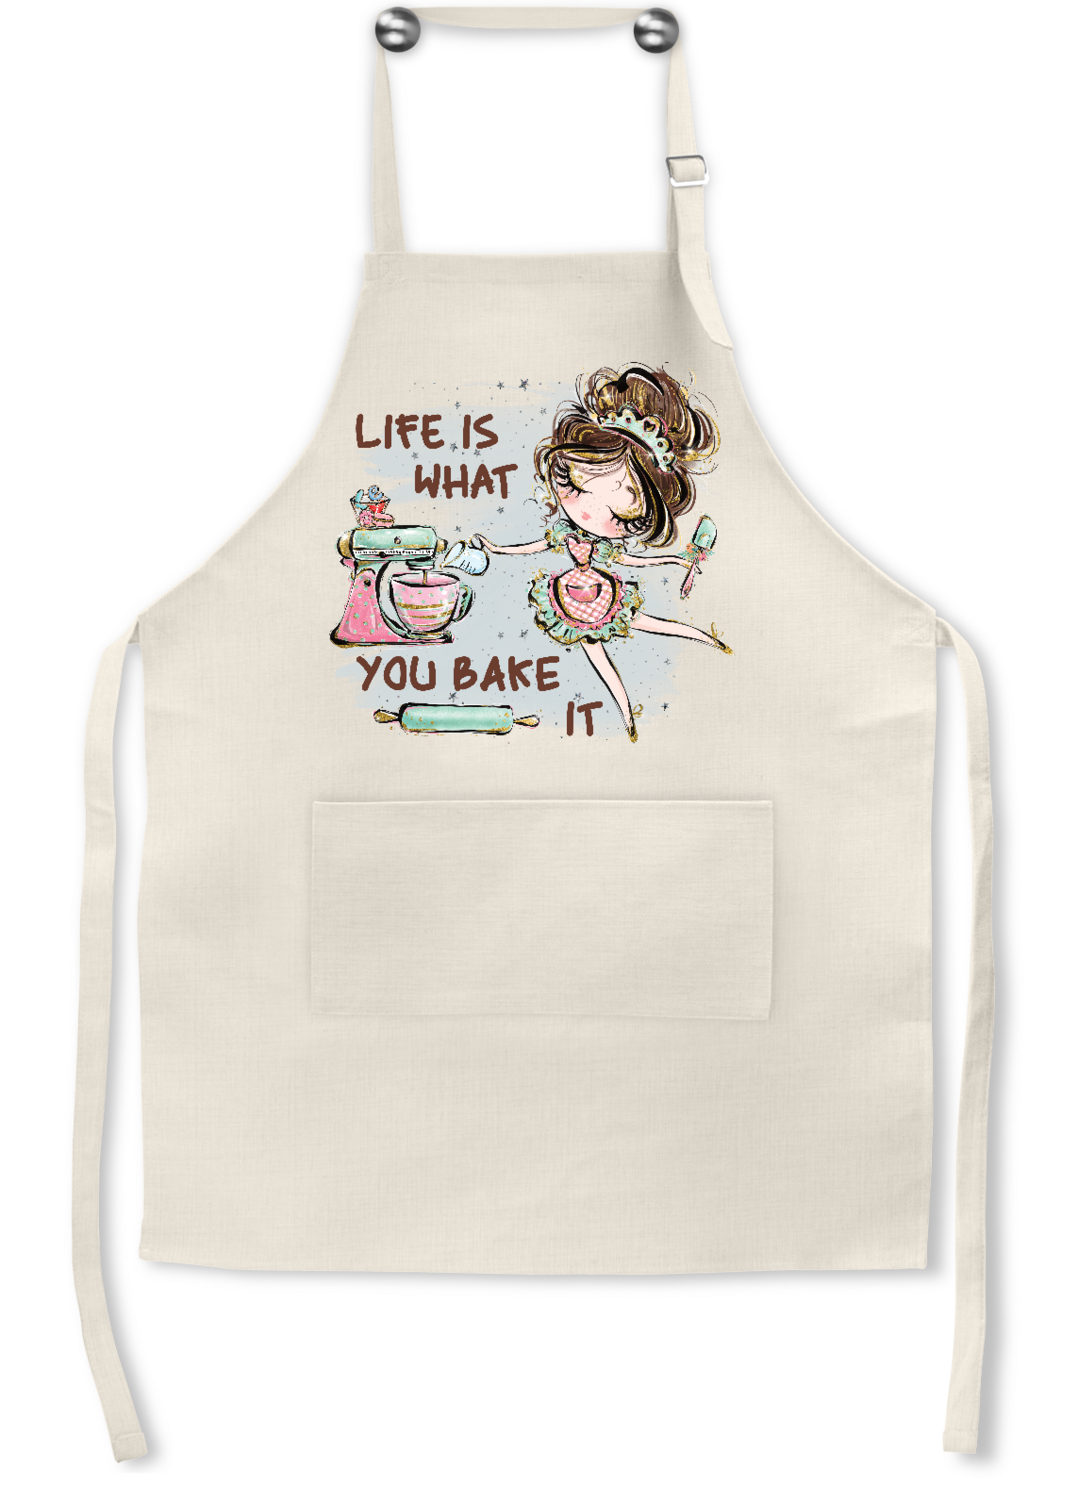 Apron: LIFE IS WHAT YOU BAKE IT